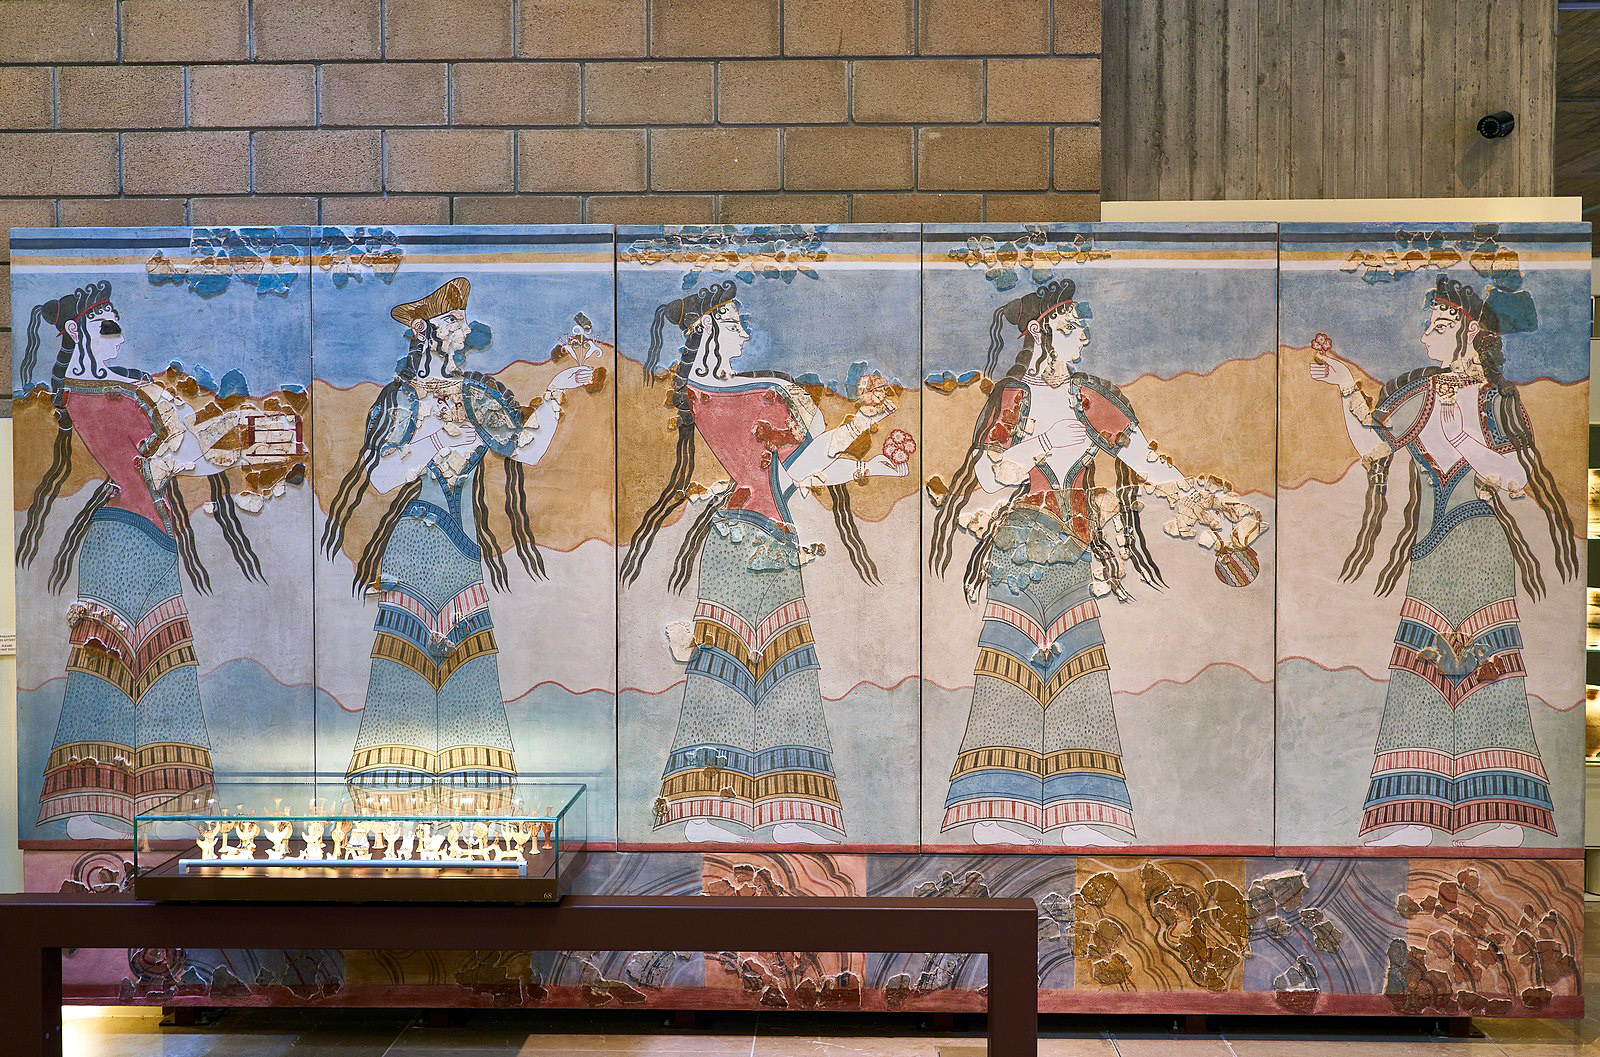 Reconstruction of a wall-painting from Thebes. Five women dressed in elaborate, brightly-coloured ruffled skirts, open-fronted tops, and headdresses, walk in a procession, holding offerings such as flowers. Photo: George E. Koronaios, CC0, via Wikimedia CommonsReconstruction of a wall-painting from Thebes. Five women dressed in elaborate, brightly-coloured ruffled skirts, open-fronted tops, and headdresses, walk in a procession, holding offerings such as flowers. Photo: George E. Koronaios, CC0, via Wikimedia Commons